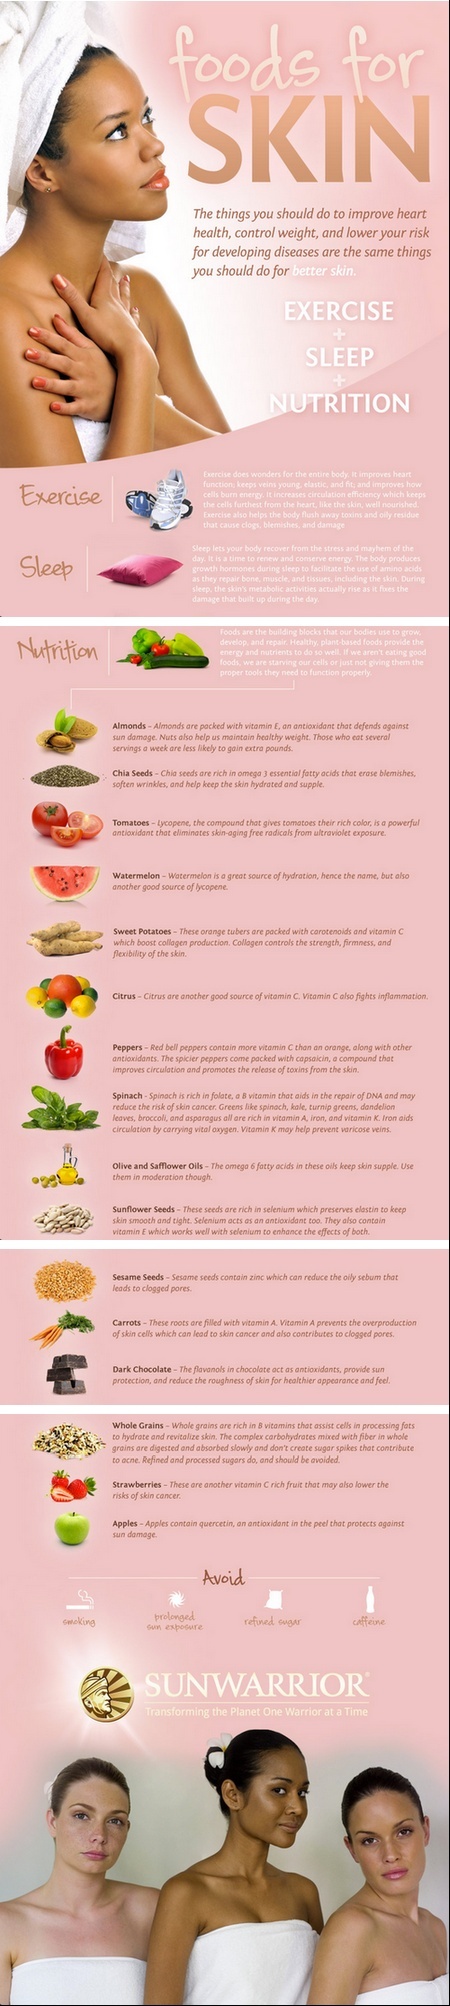 Foods for Healthy Skin